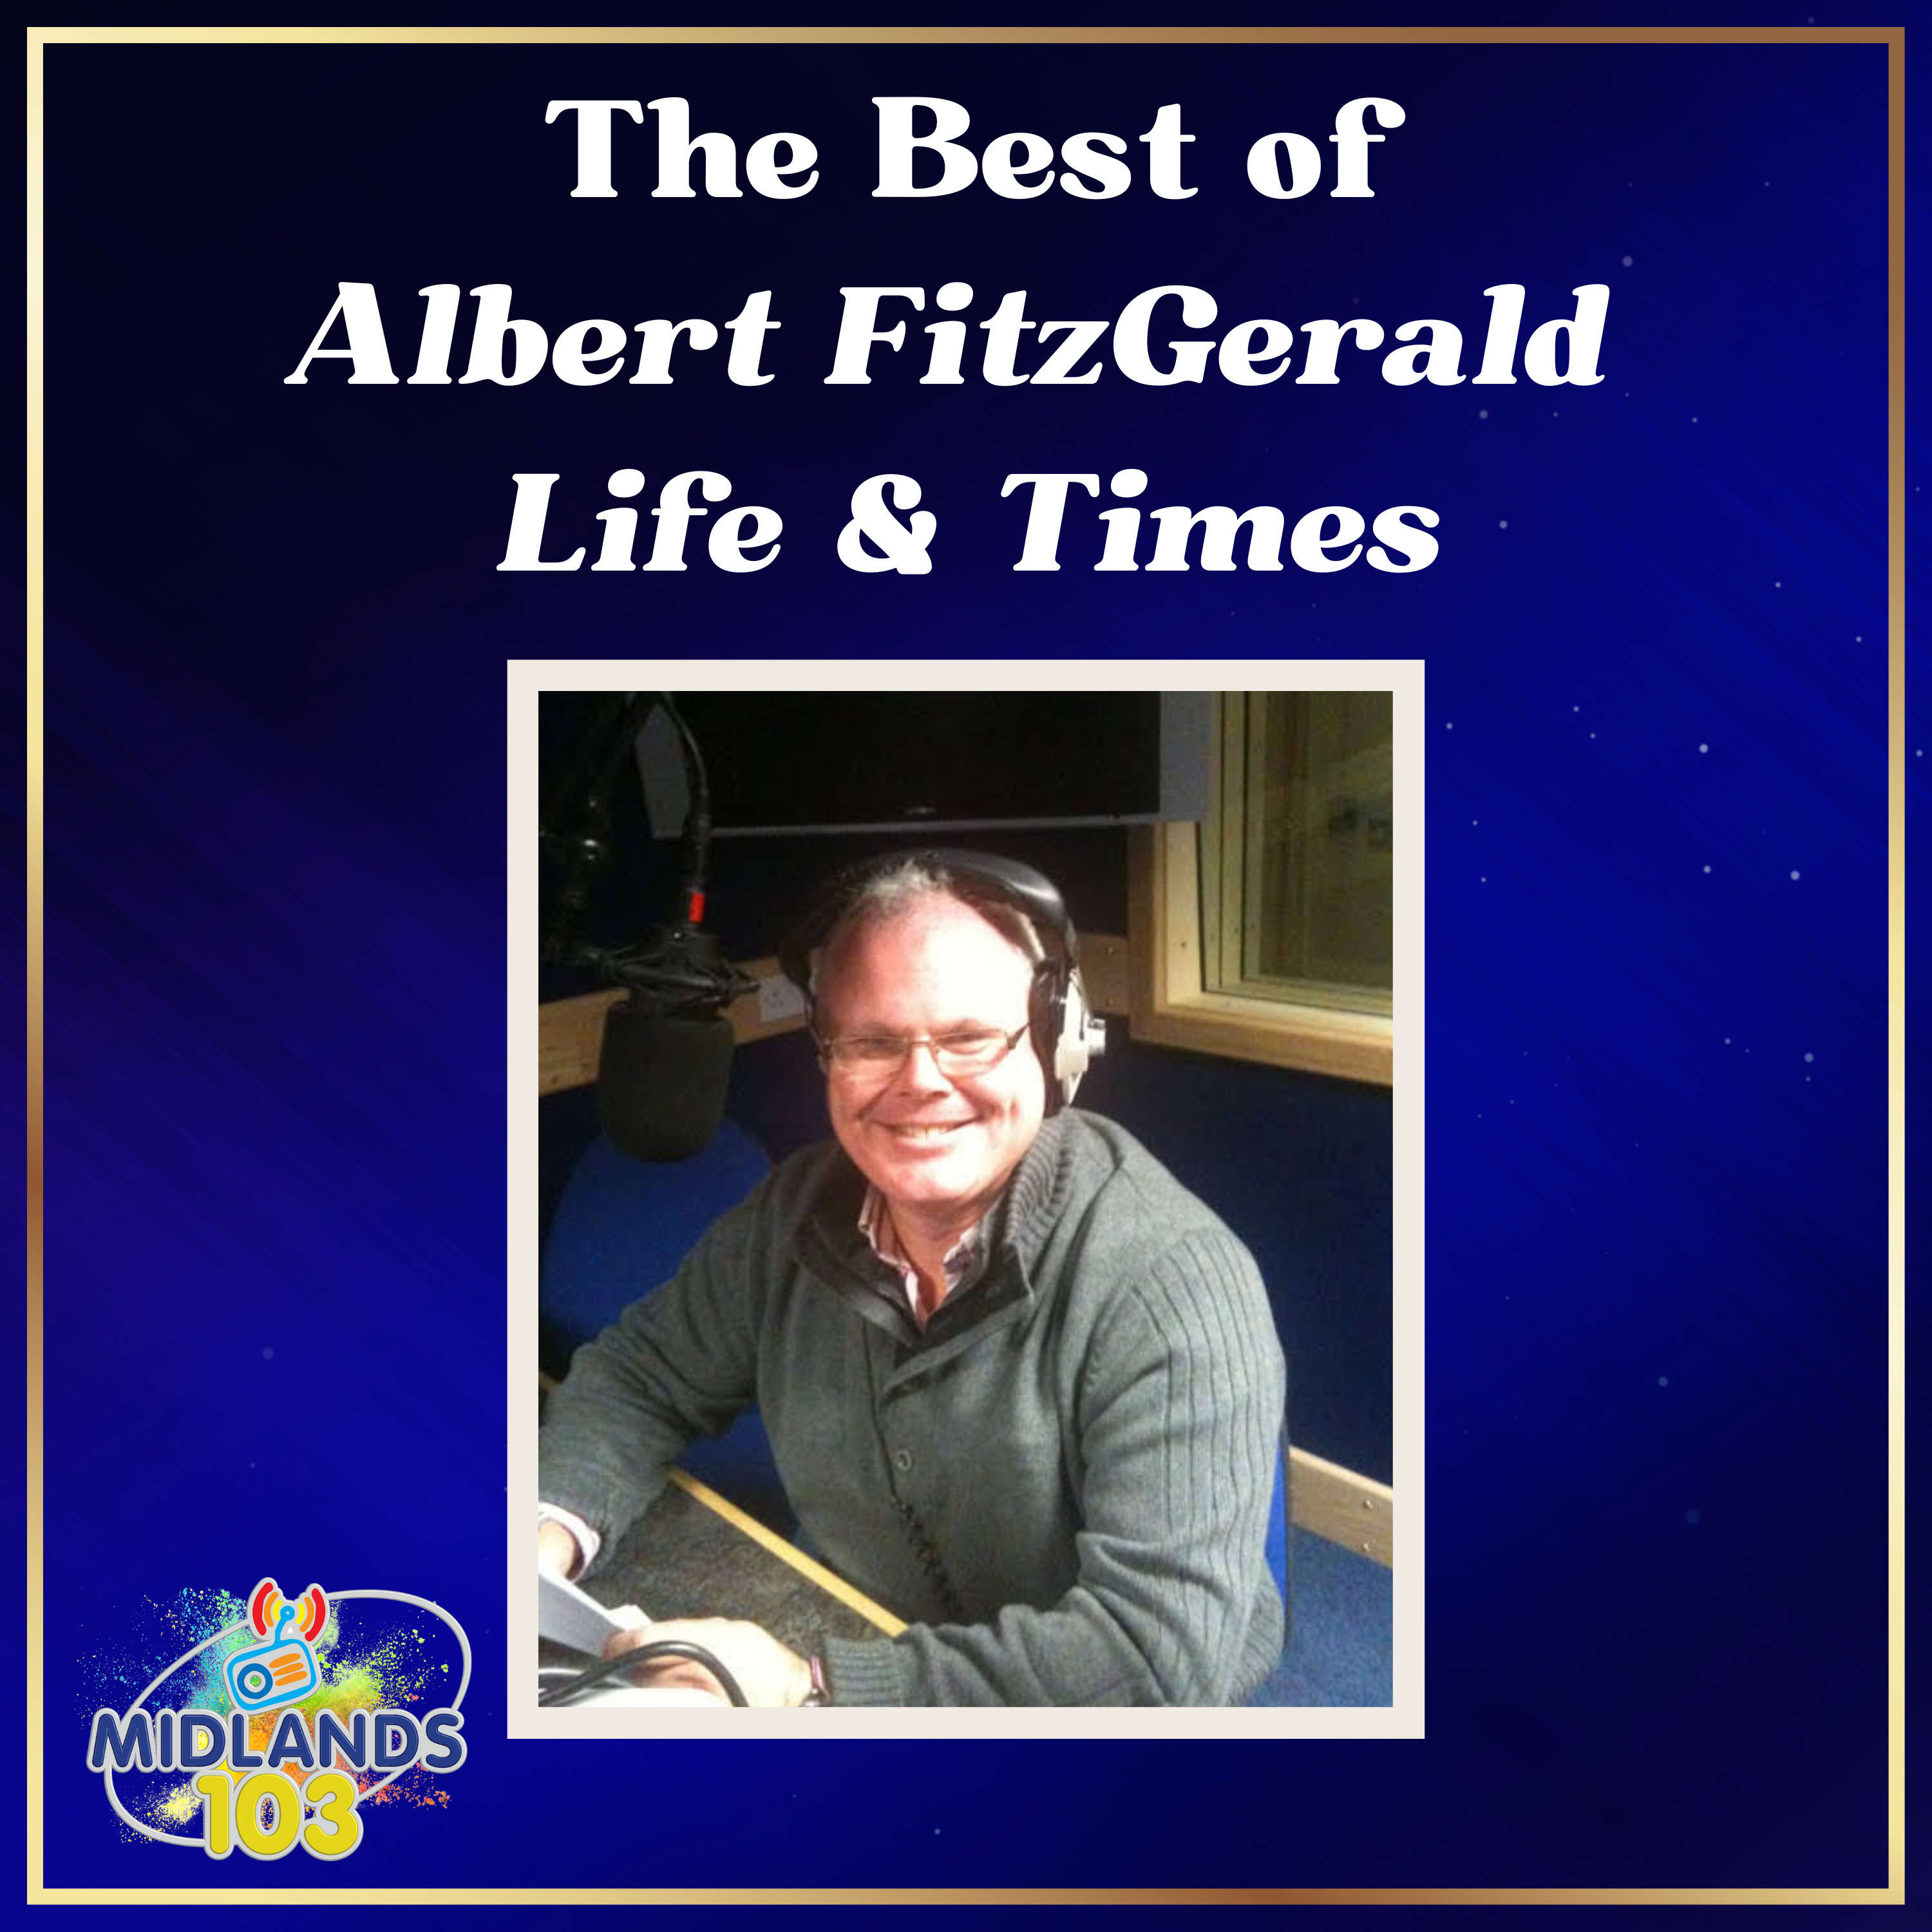 The Best of Albert FitzGerald - Life & Times